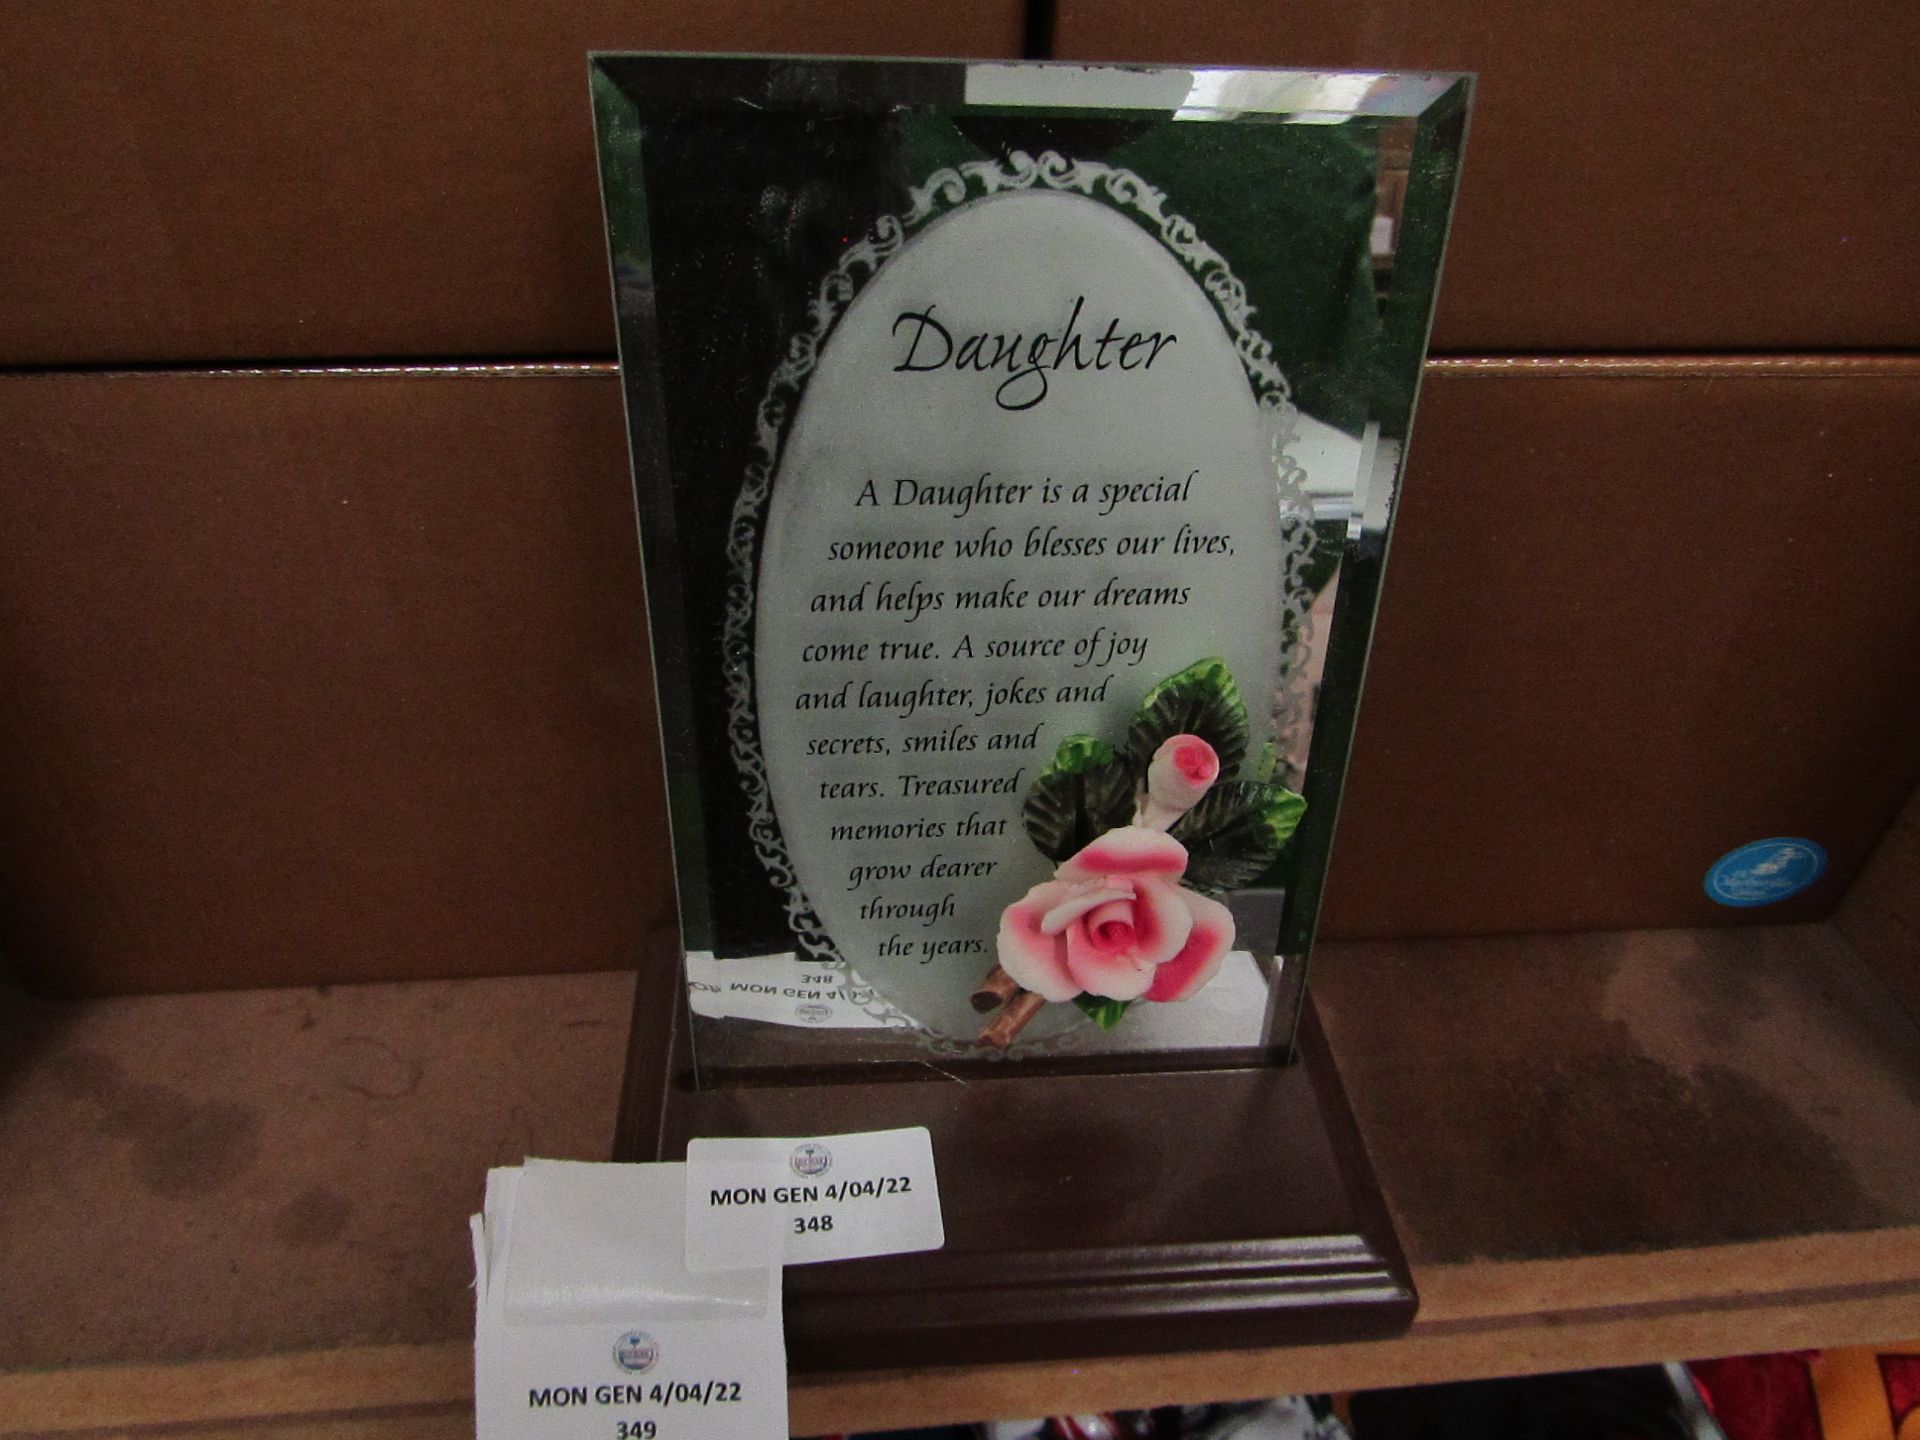 6x Mayflower Collectables - "Daughter" Glass Plaque Ornament - New & Boxed.